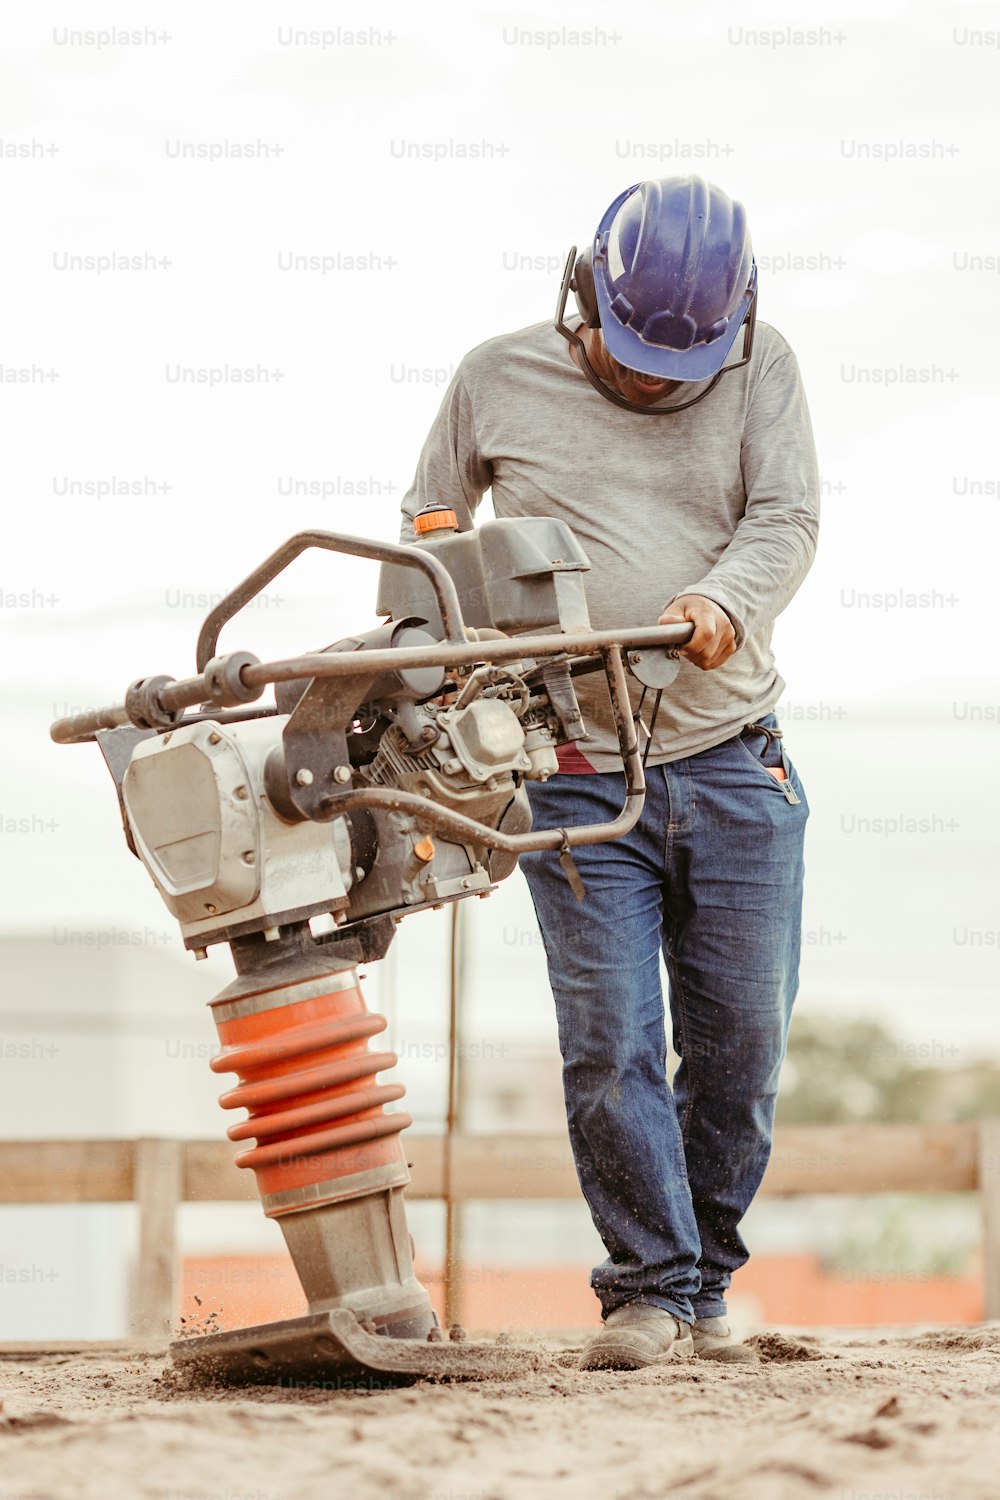 a man in a hard hat working on a machine